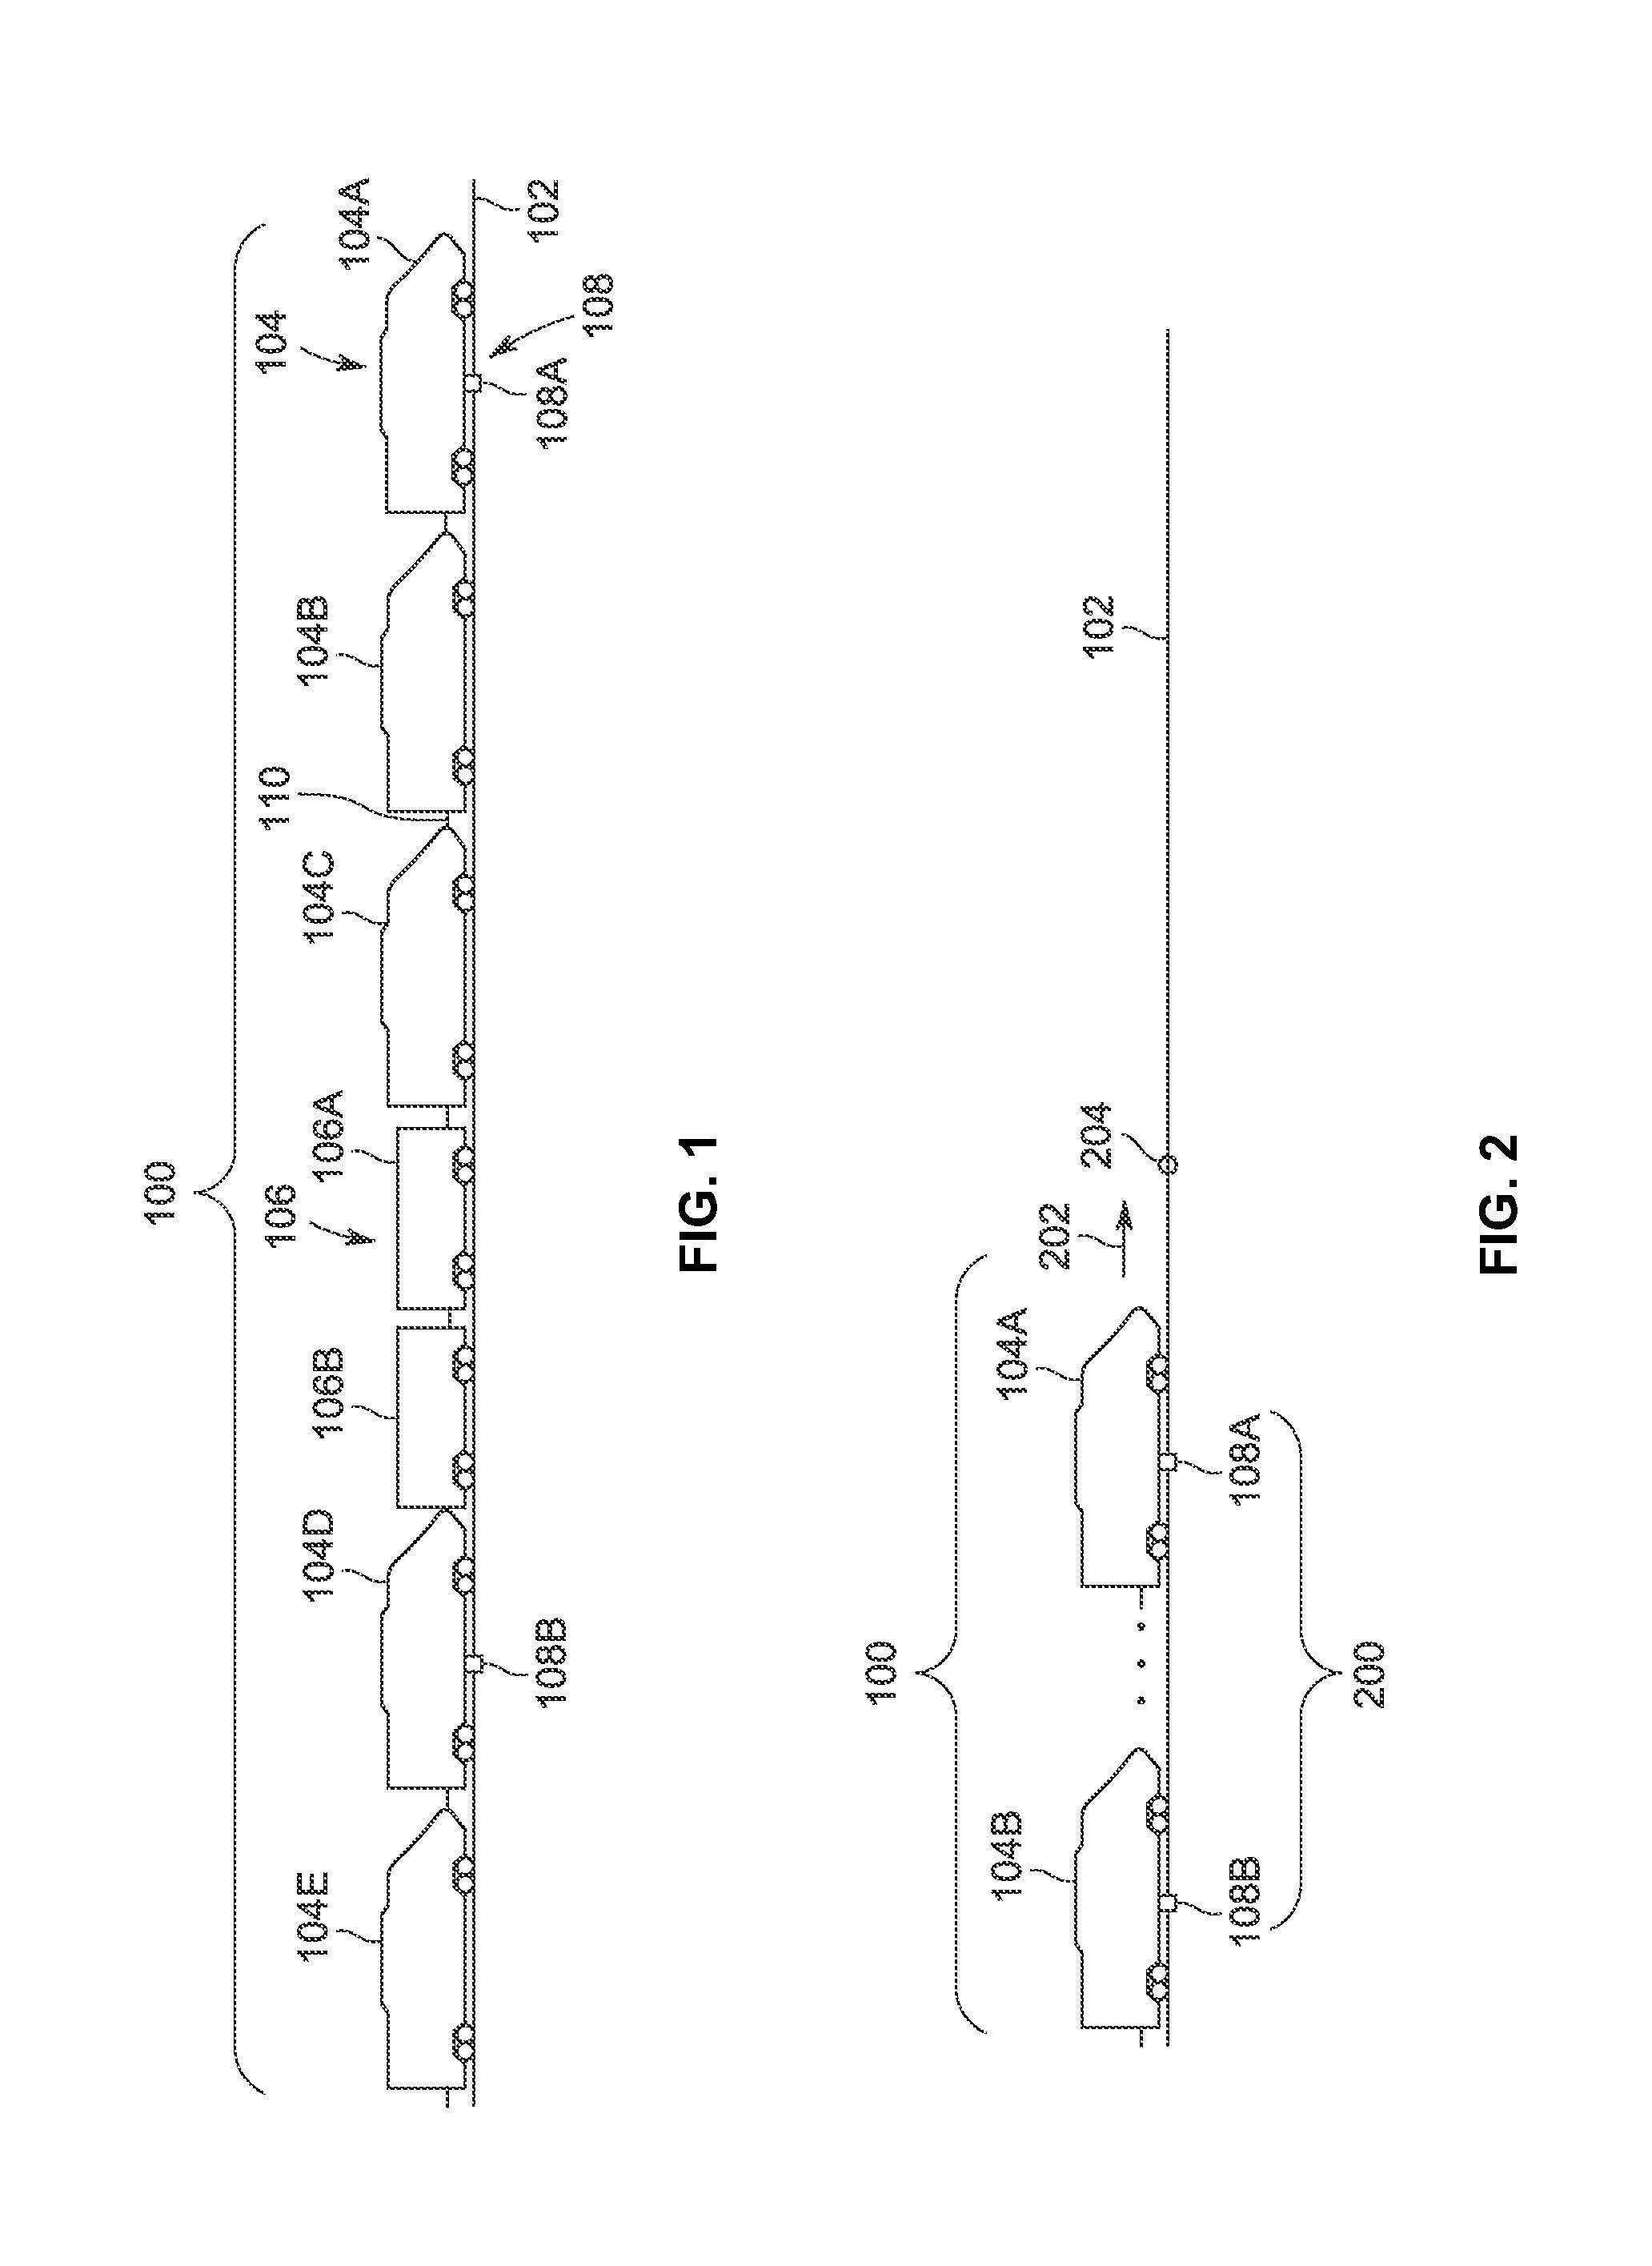 System and method for inspecting a route during movement of a vehicle system over the route